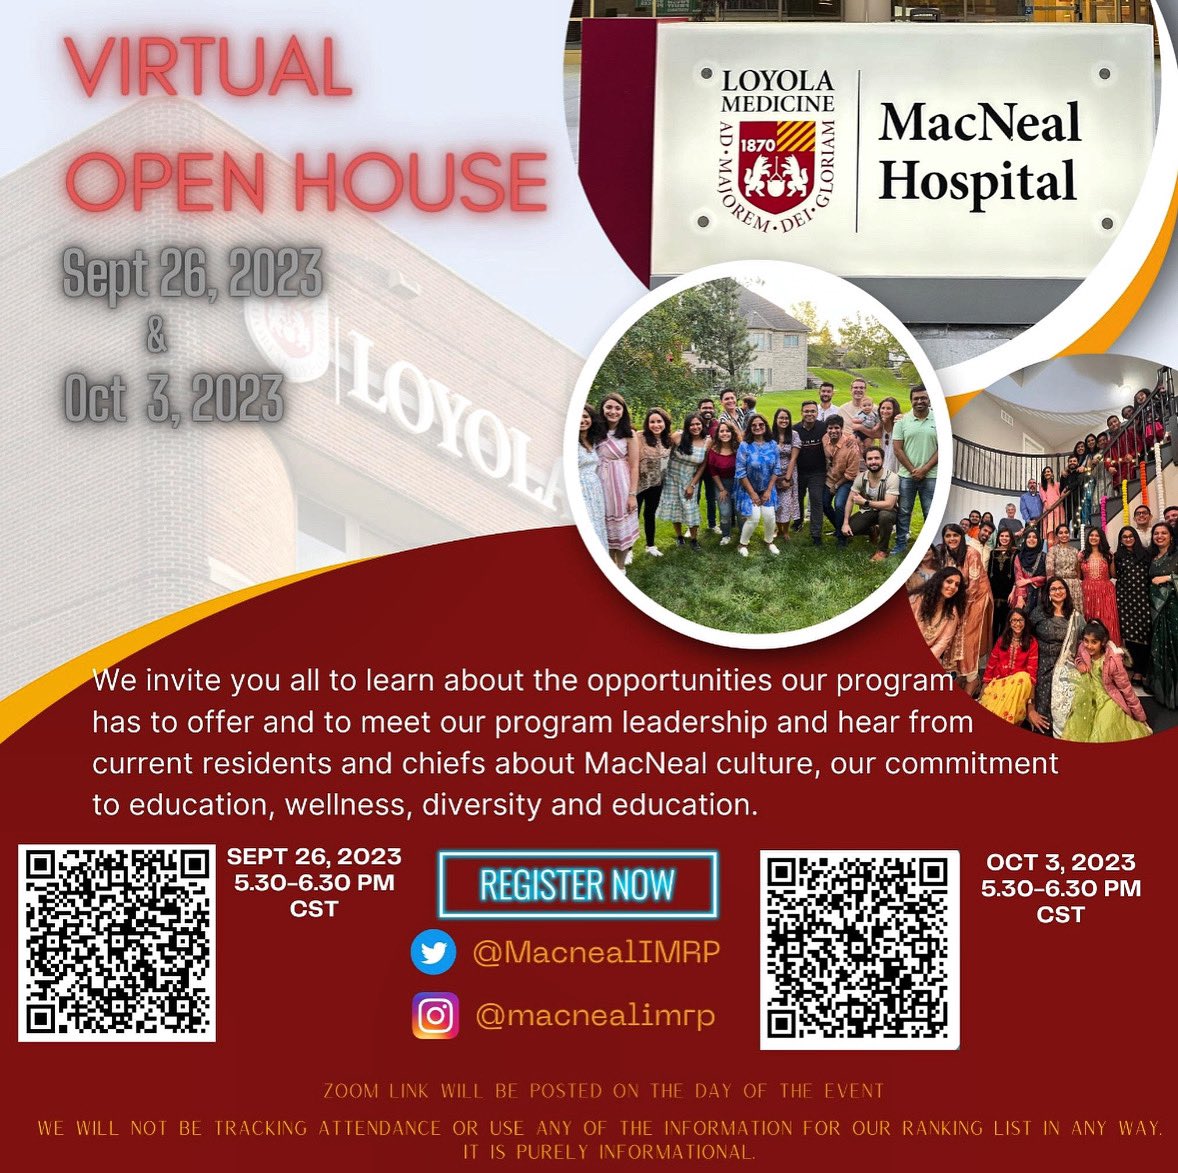 Event alert 🚨‼️🔝We're thrilled to extend an invitation to our virtual open house! This year, we're hosting two separate events. Be sure to register now; we can't wait to connect with you! #Match2024 #MedTwitter #MS4 #IMG #residencymatch #InternalMedicine @Inside_TheMatch